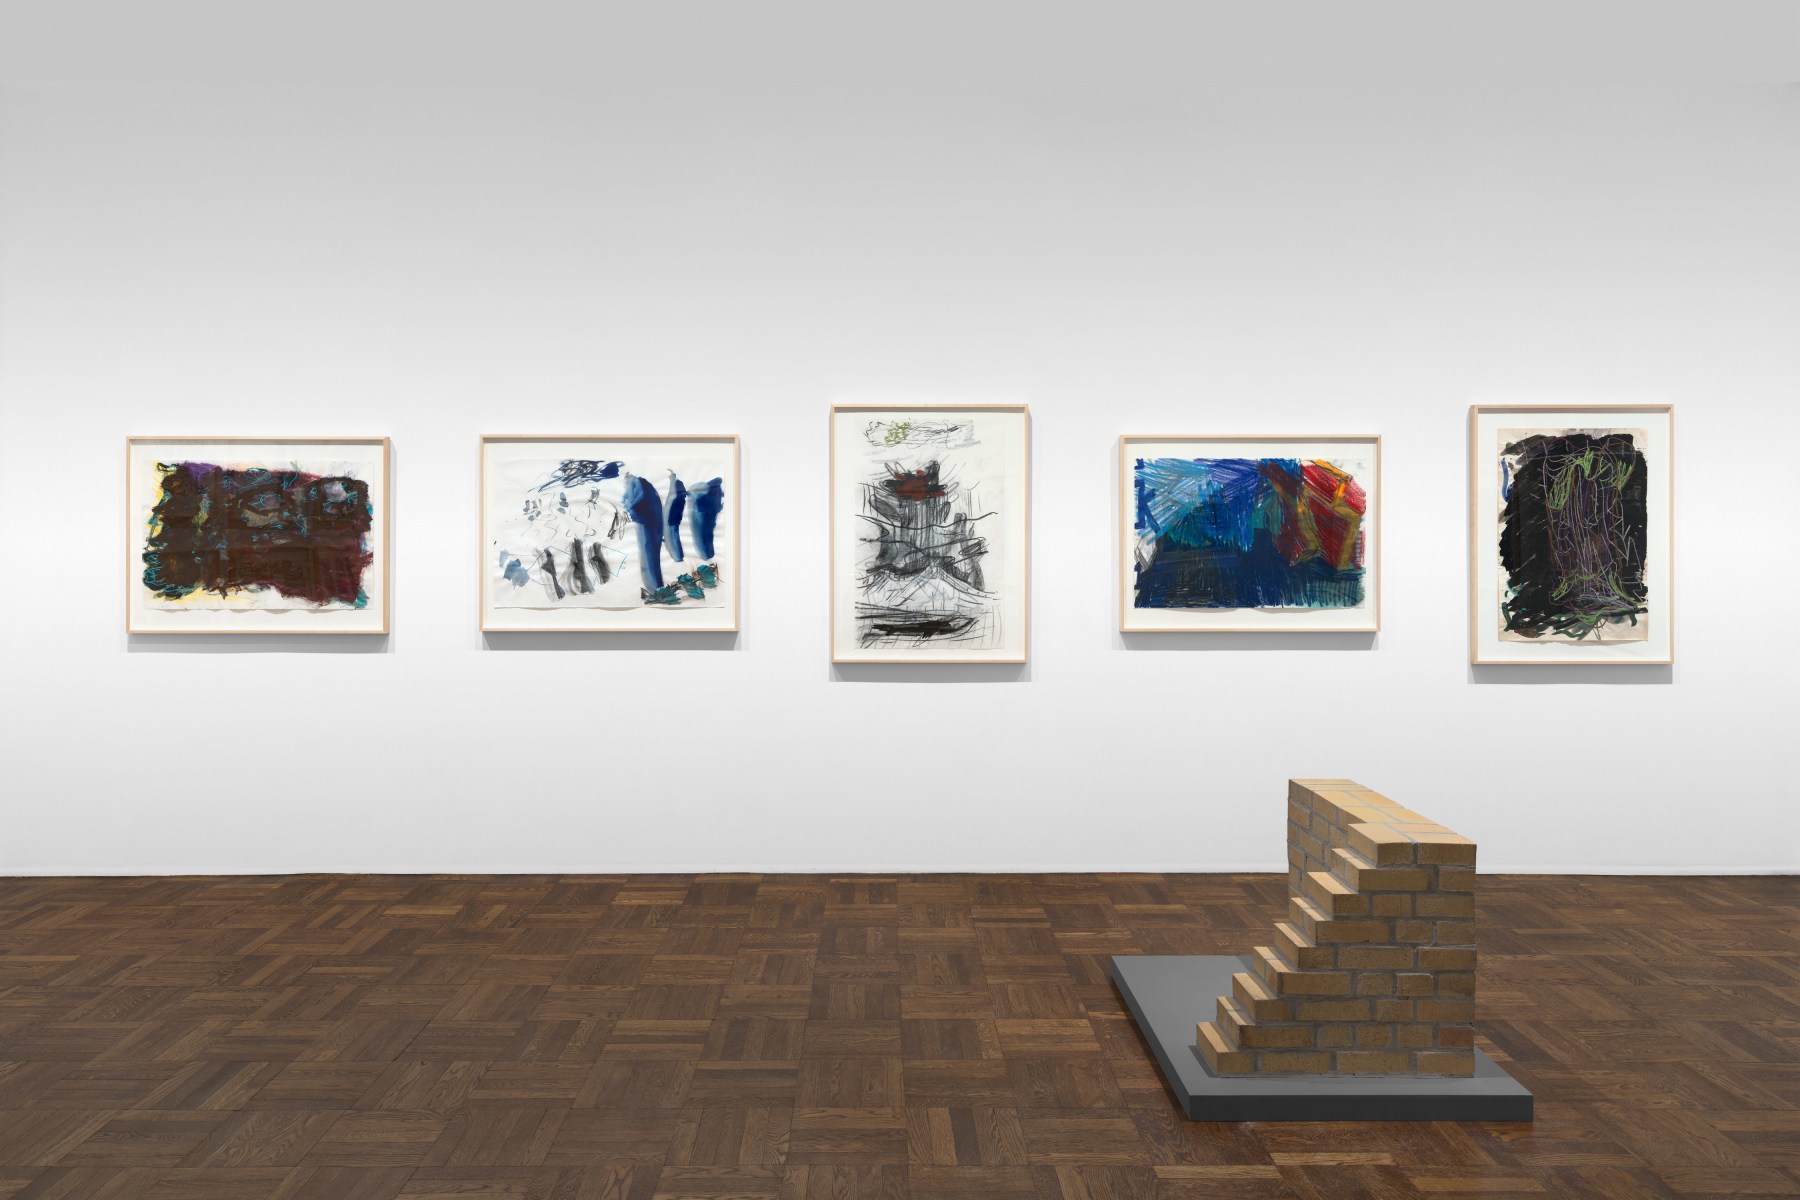 PER KIRKEBY Works on Paper, Works in Brick 20 November 2019 through 25 January 2020 UPPER EAST SIDE, NEW YORK, Installation View 7